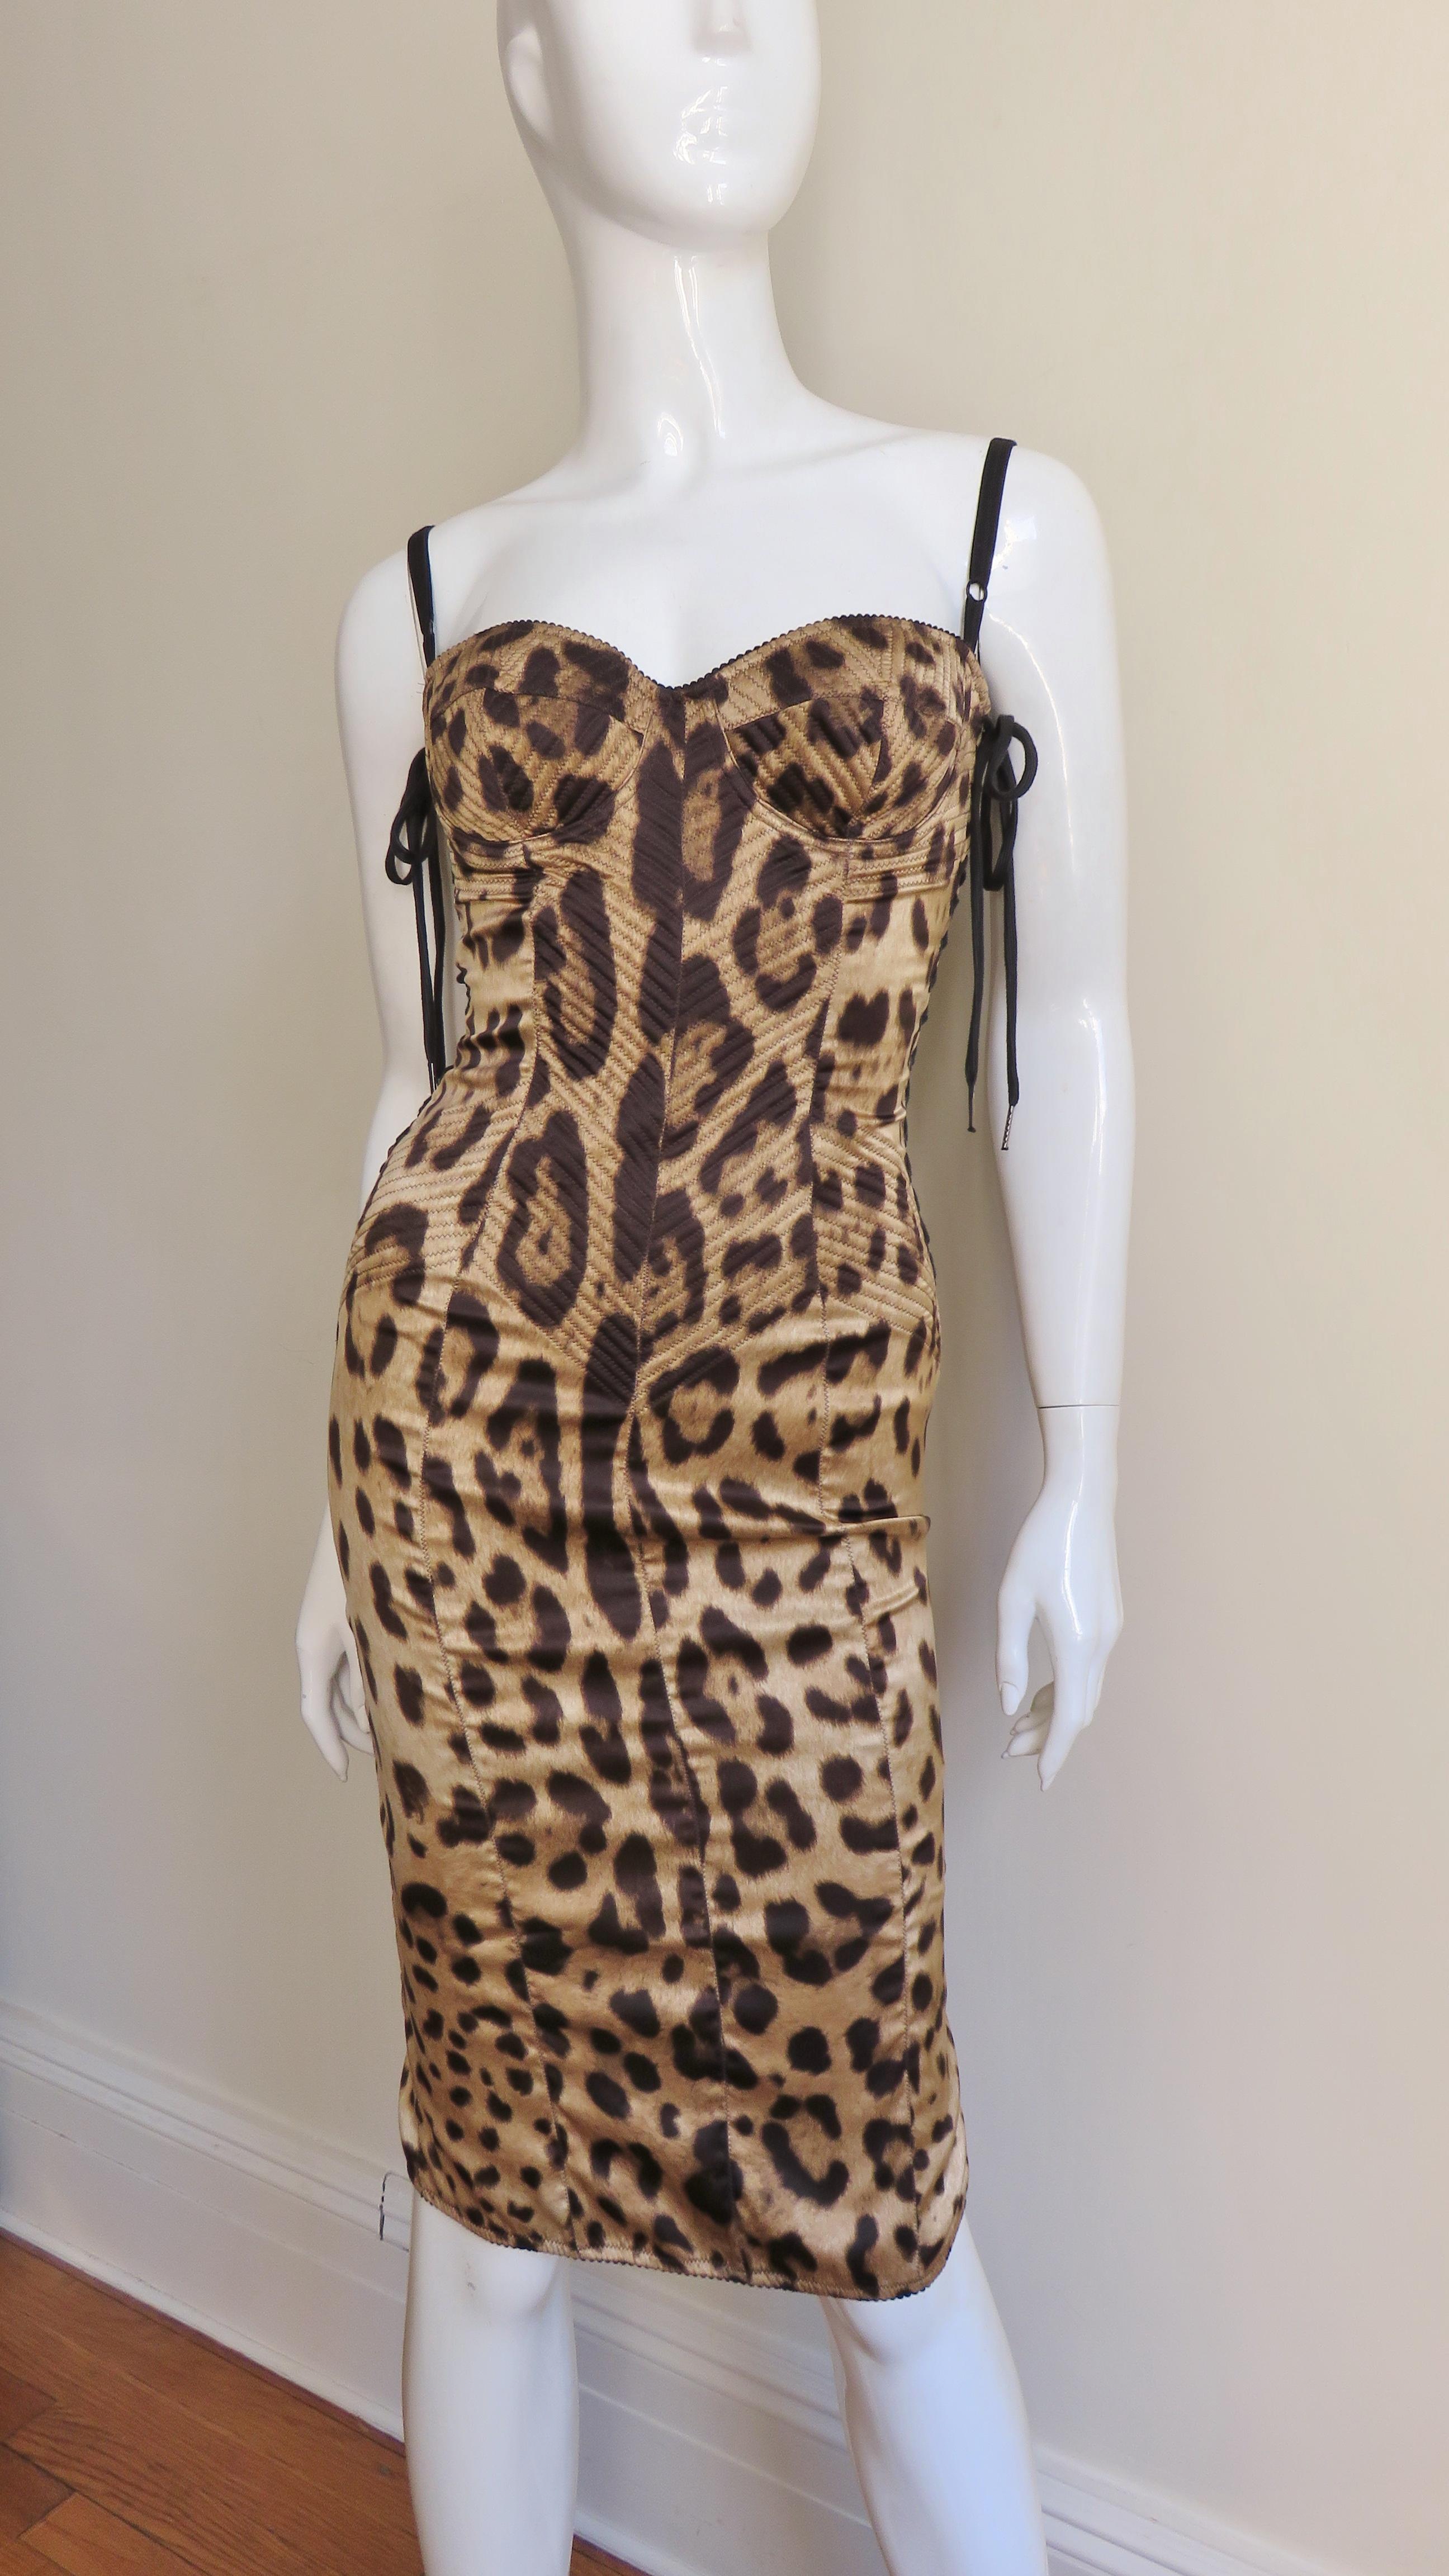 Dolce & Gabbana Lace up Silk Dress In Excellent Condition For Sale In Water Mill, NY